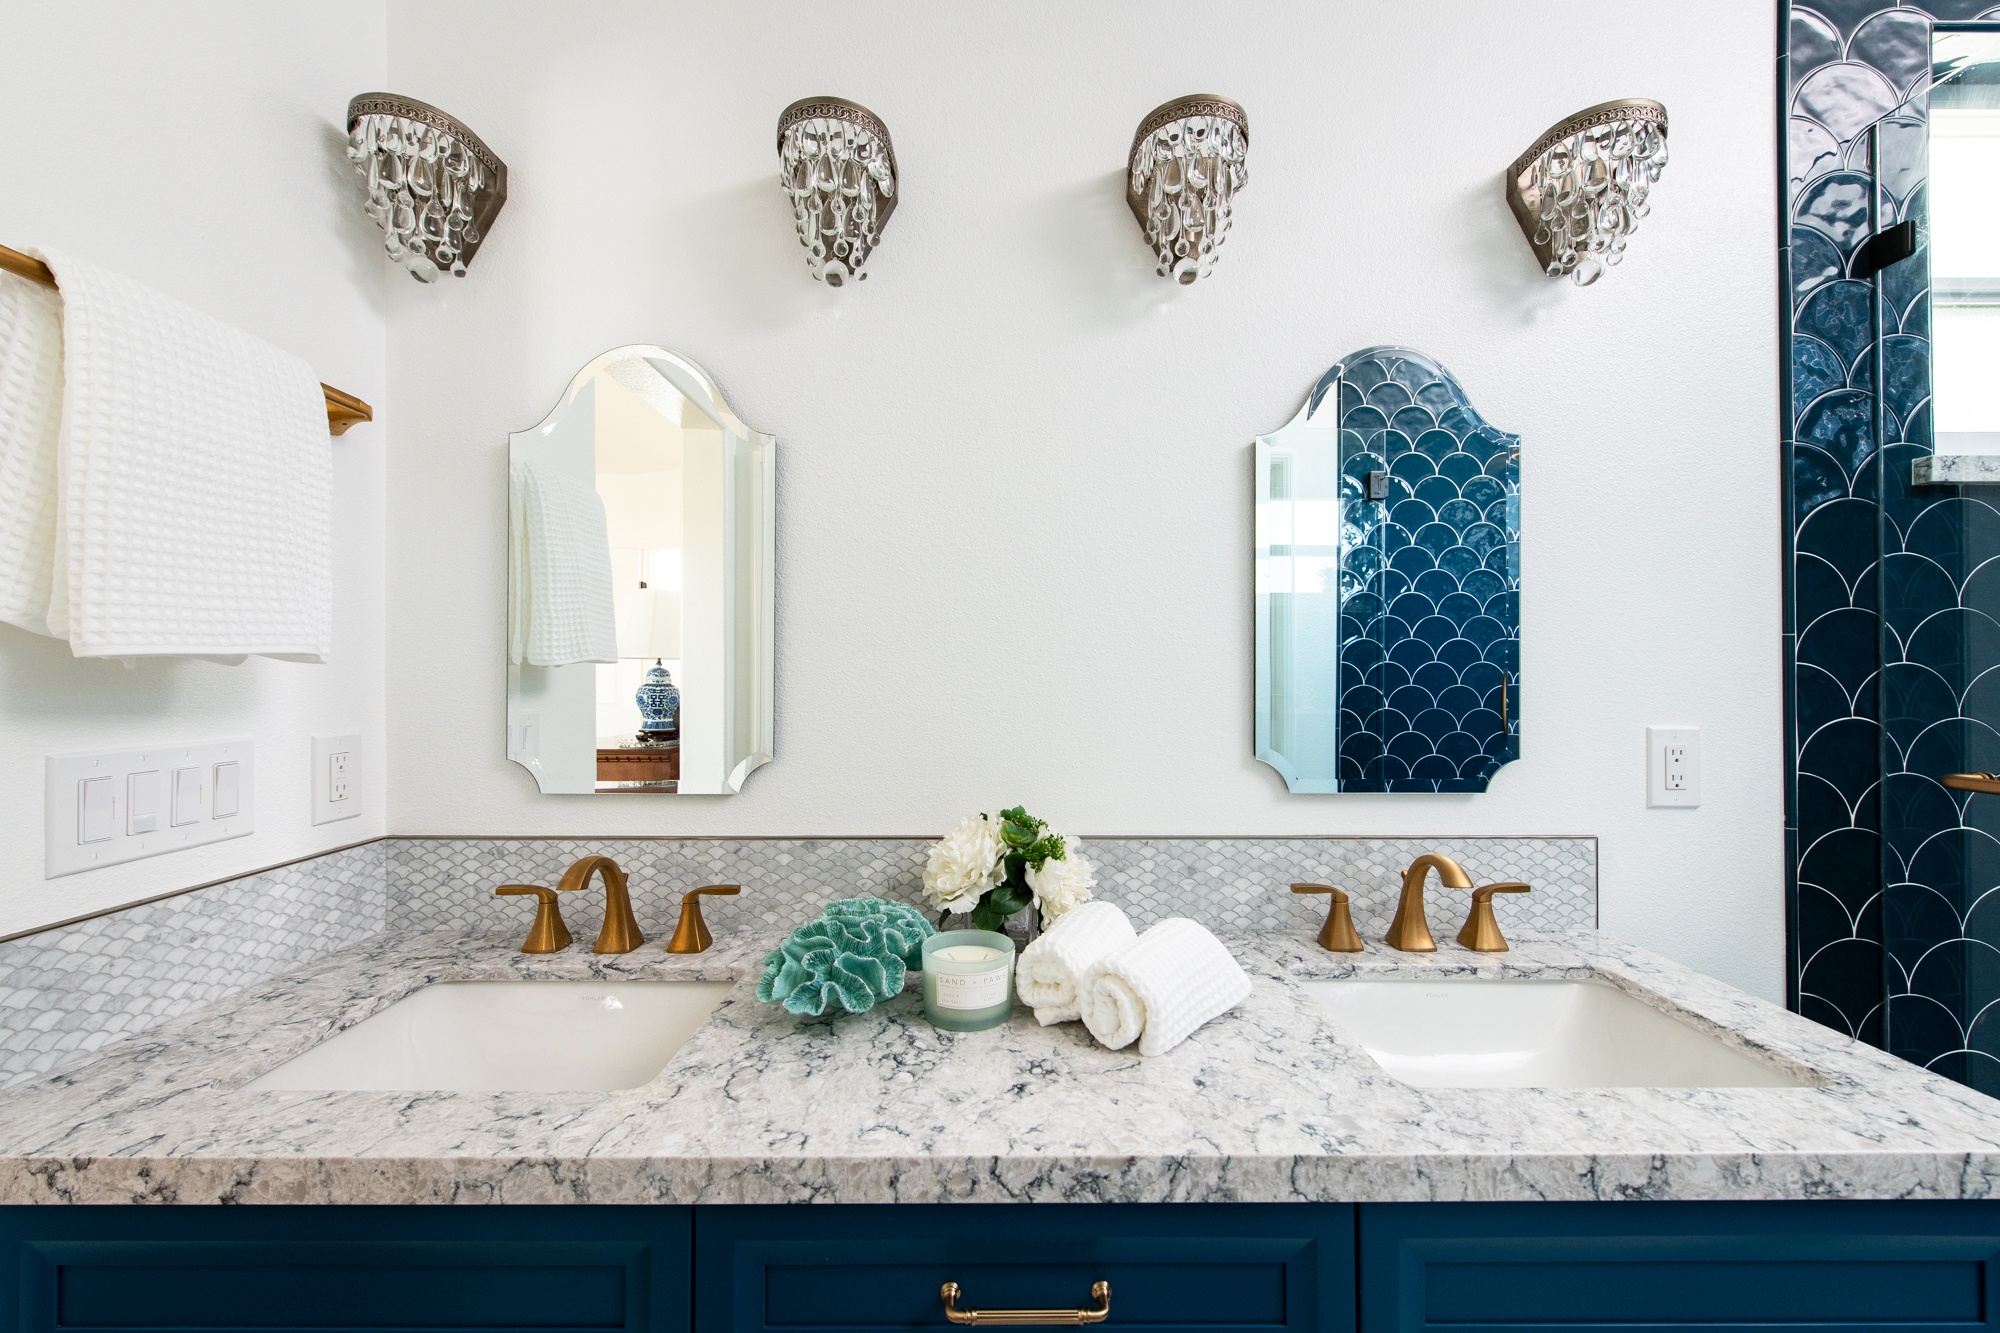 Master-bathroom-quartz-stone-countertops-with-custom-blue-painted-cabinetry-in-bathroom-remodel - bring color into the bathroom